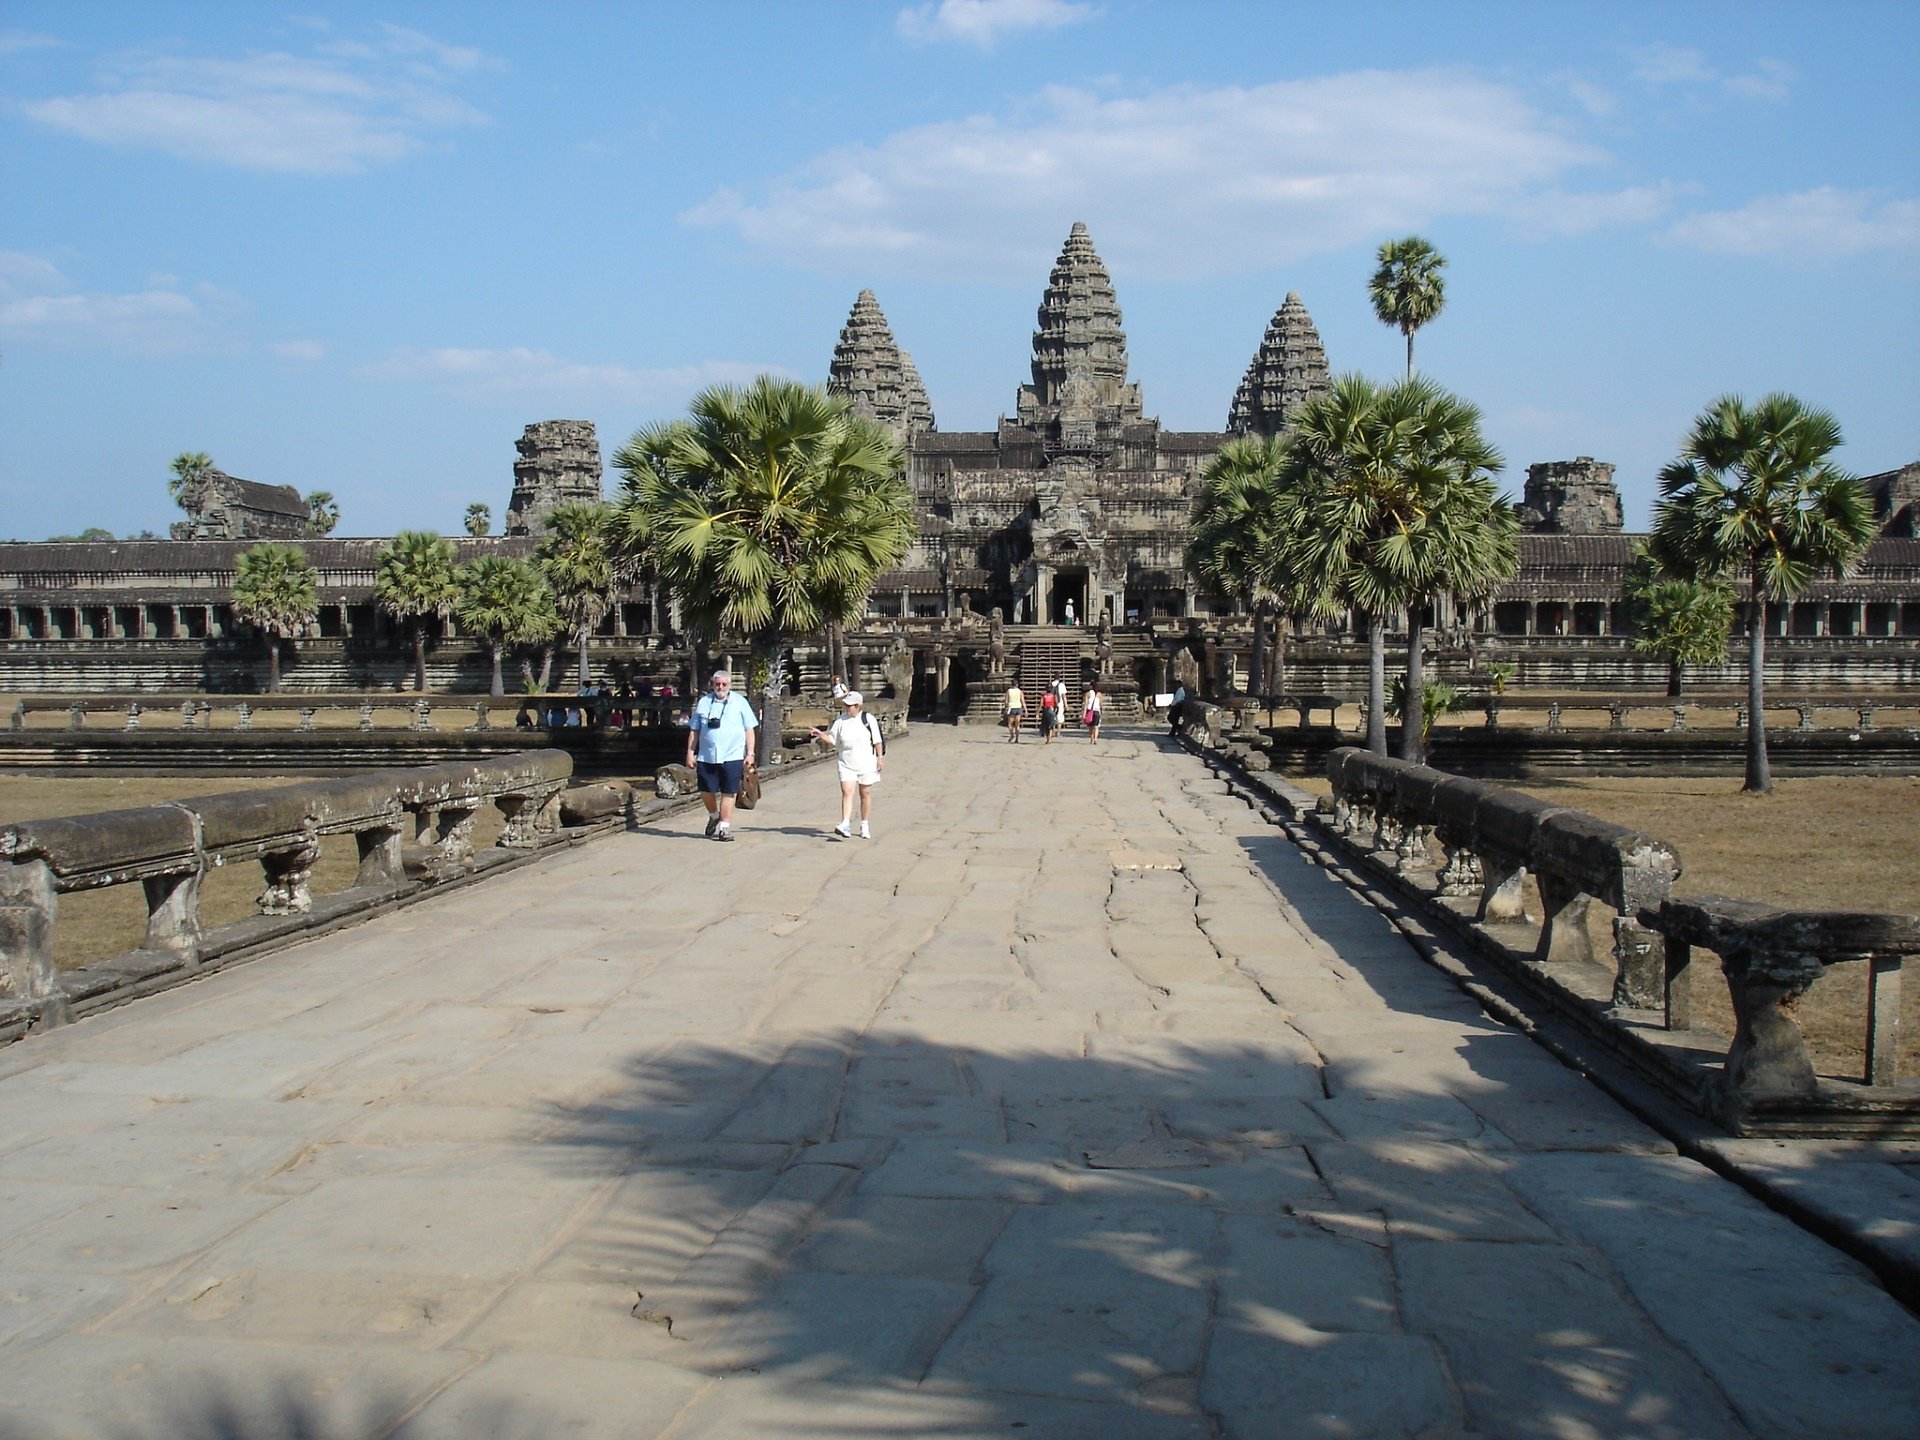 Image of Angkor Temples from sunrise to sunset